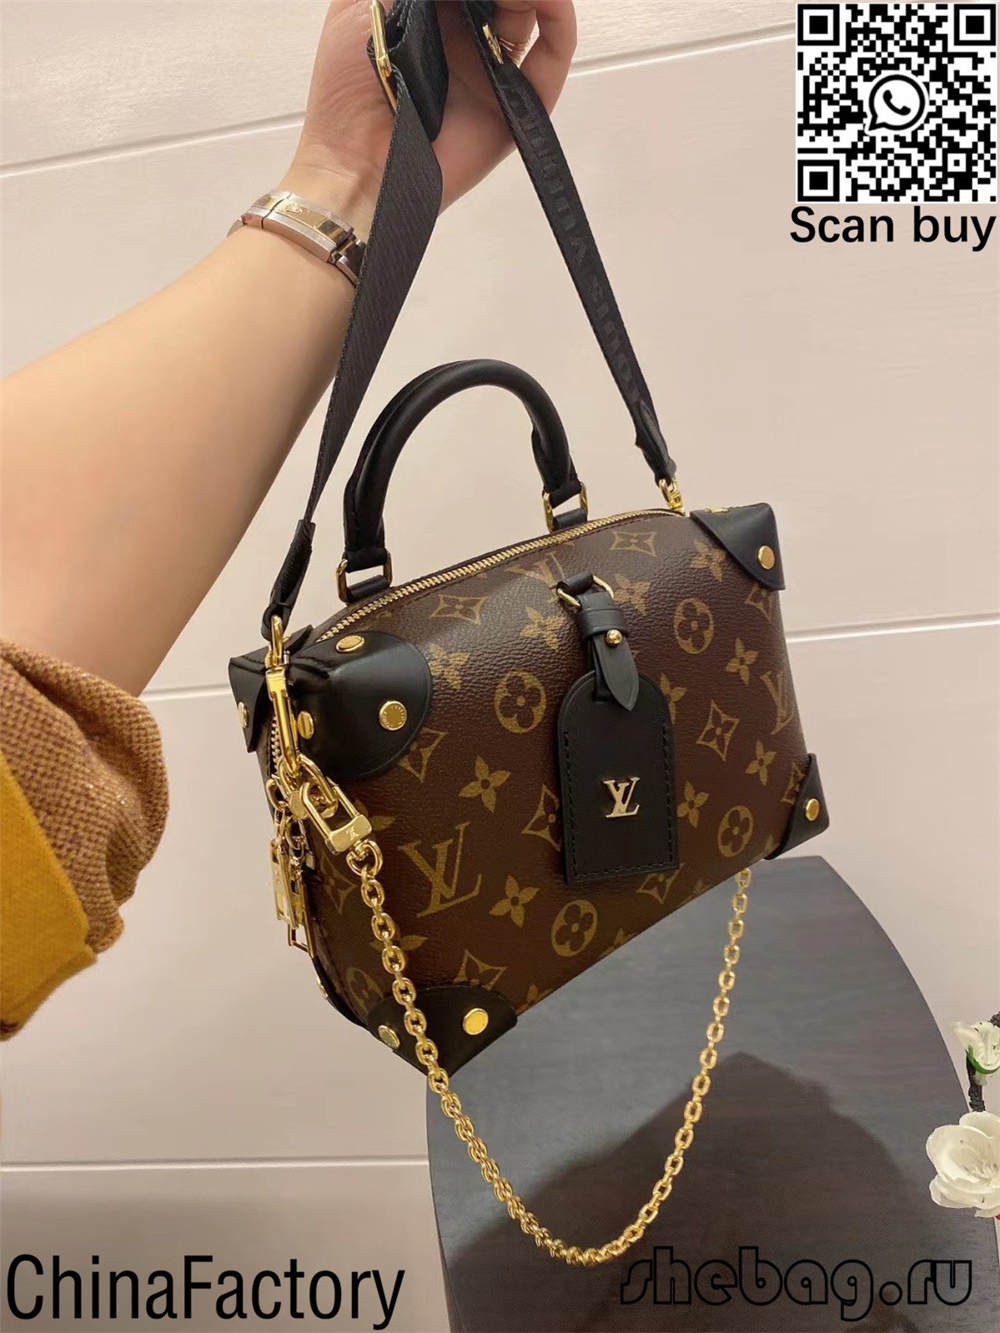 12 tips to teach you How to buy replica designer bags (2022 updated)-Best Quality Fake designer Bag Review, Replica designer bag ru